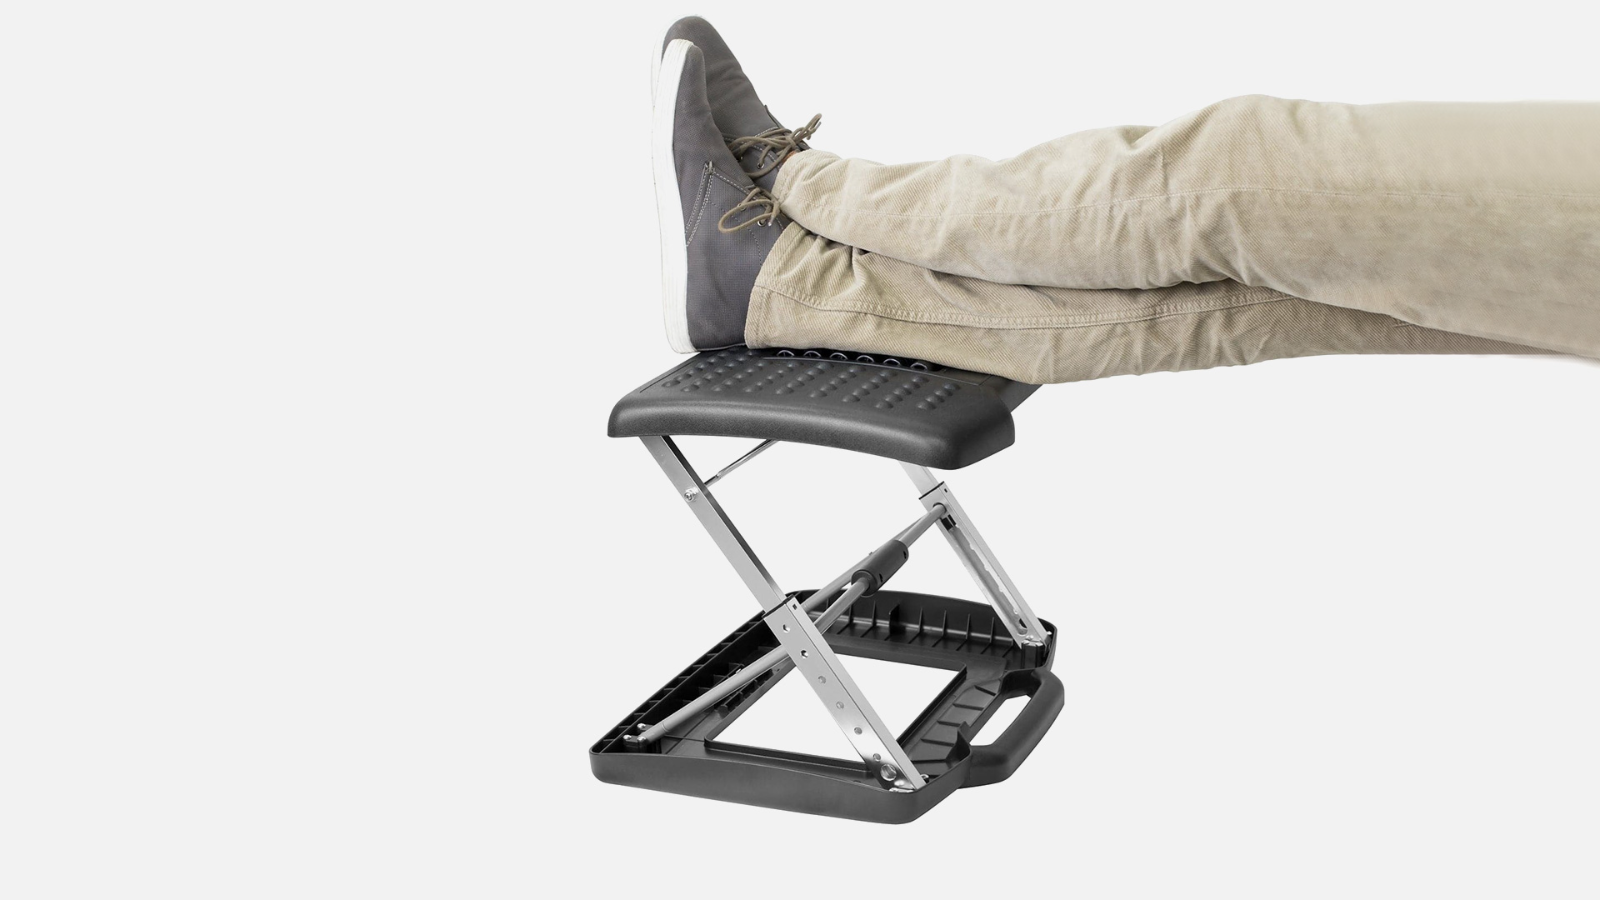 Mount-it! Footrest With Massaging Bead